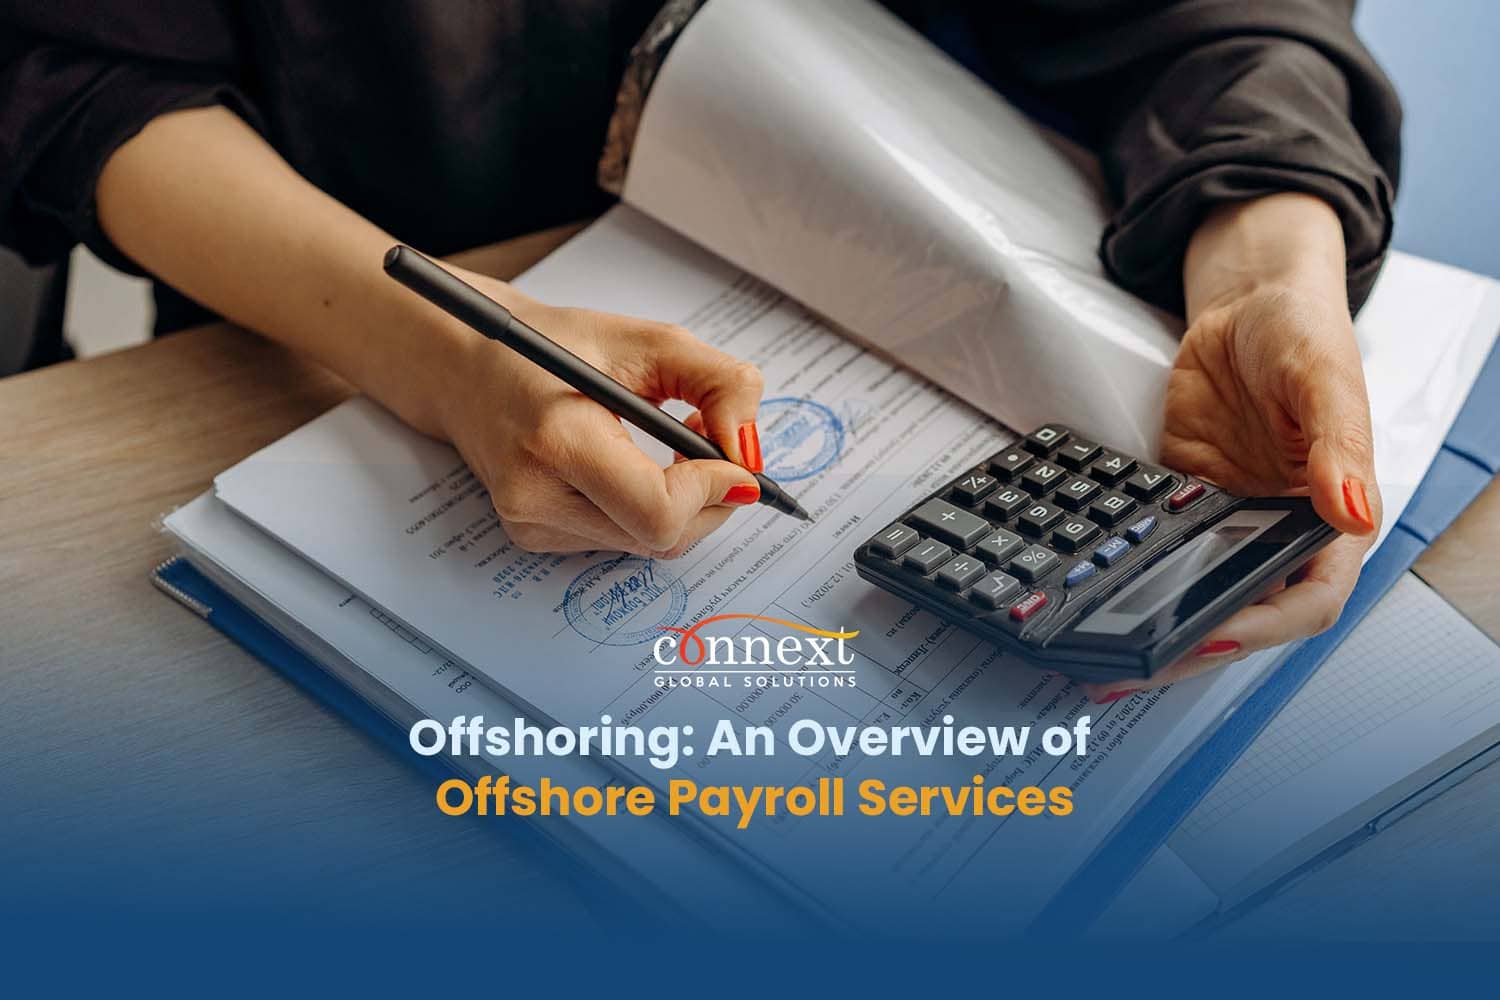 Offshoring: An Overview of Offshore Payroll Services